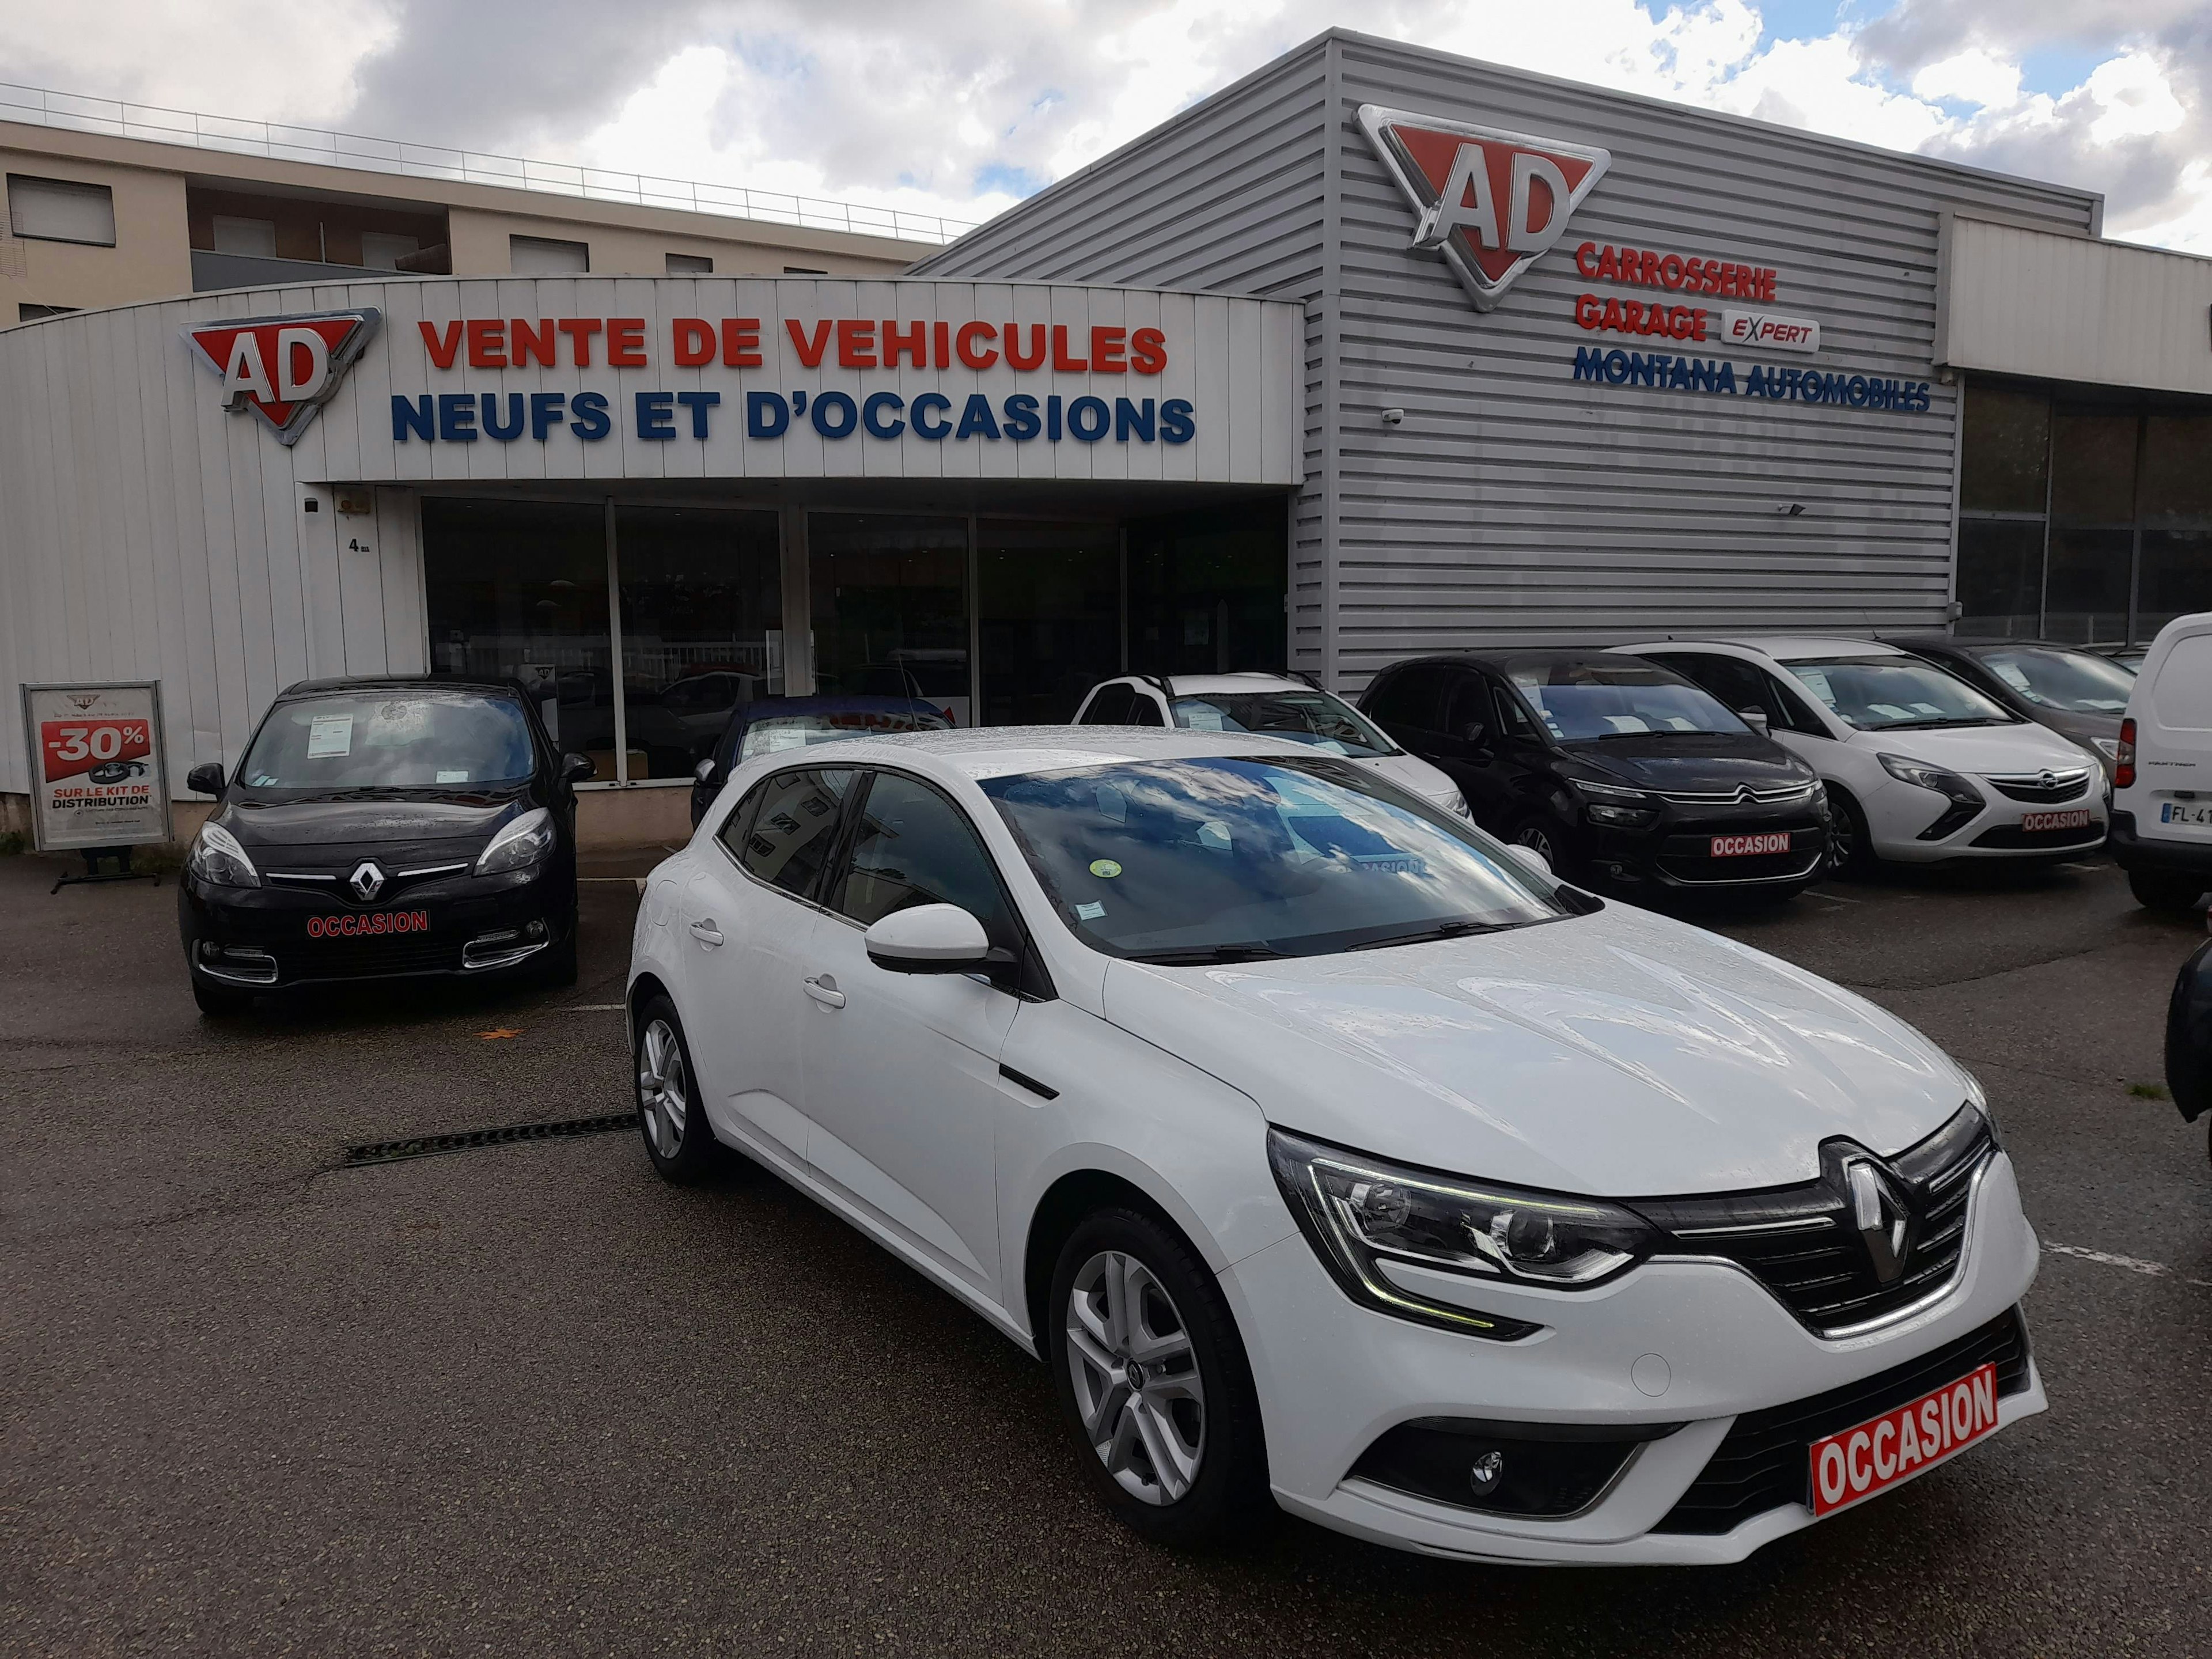 Renault Mégane IV 1.5 dCi 110ch energy Business occasion